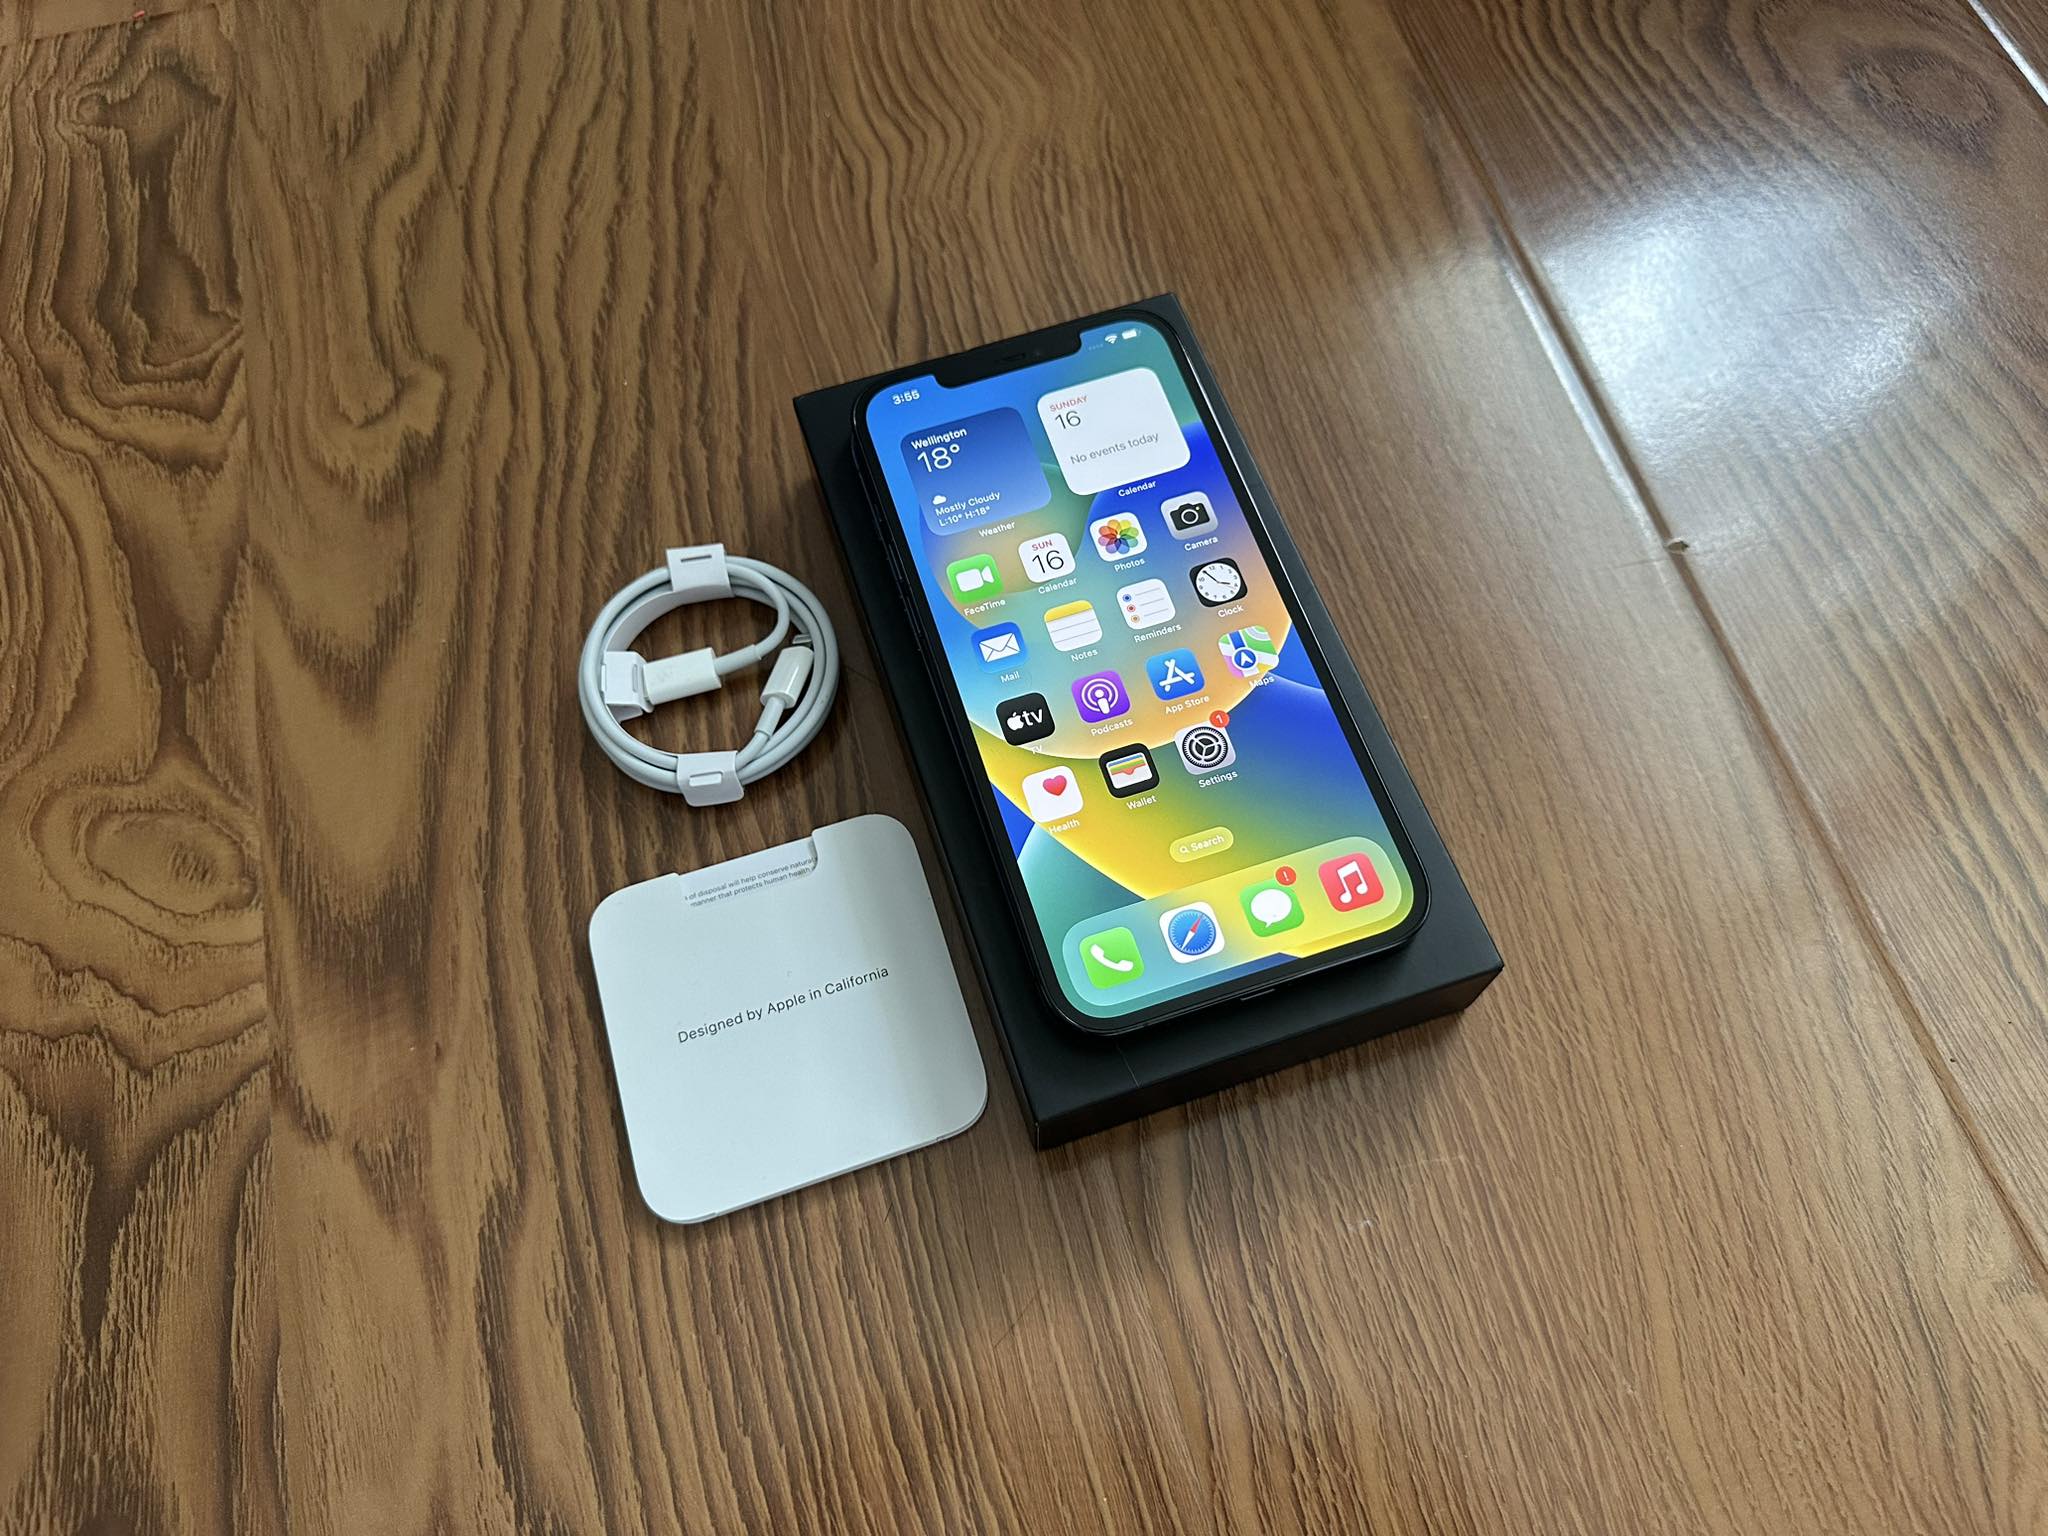 Apple iPhone 13 Pro Max 128GB 5G Graphite Original Box (As New) New Battery, Case, Glass Screen Protector & Shipping